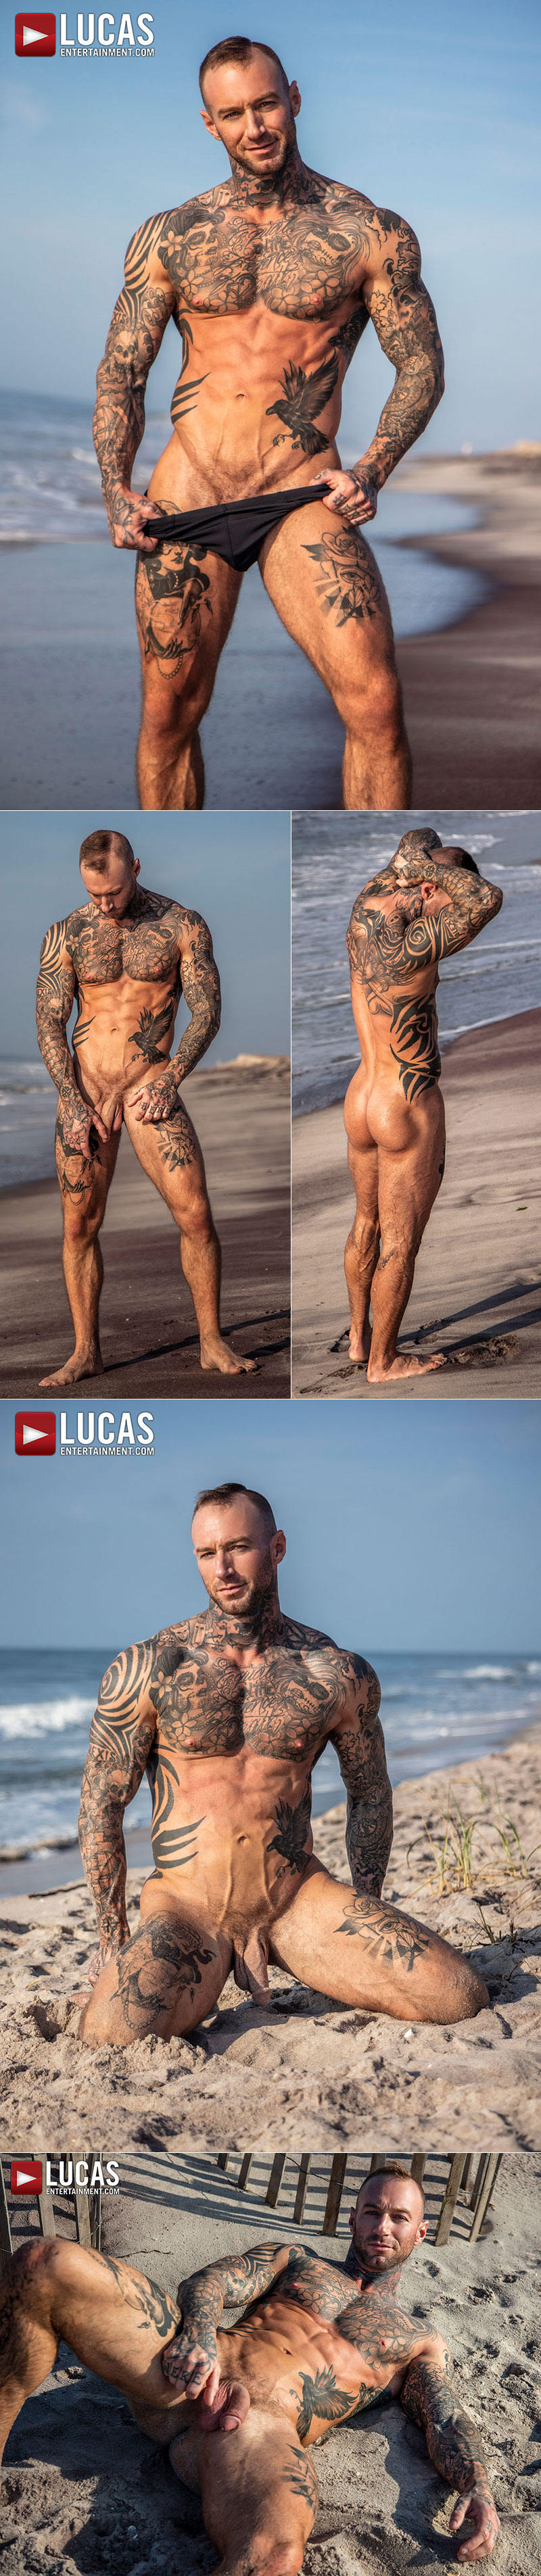 Lucas Entertainment: Drew Dixon, Edison Fuller and Dylan James' bareback threesome in "Tearing Up Some Ass"